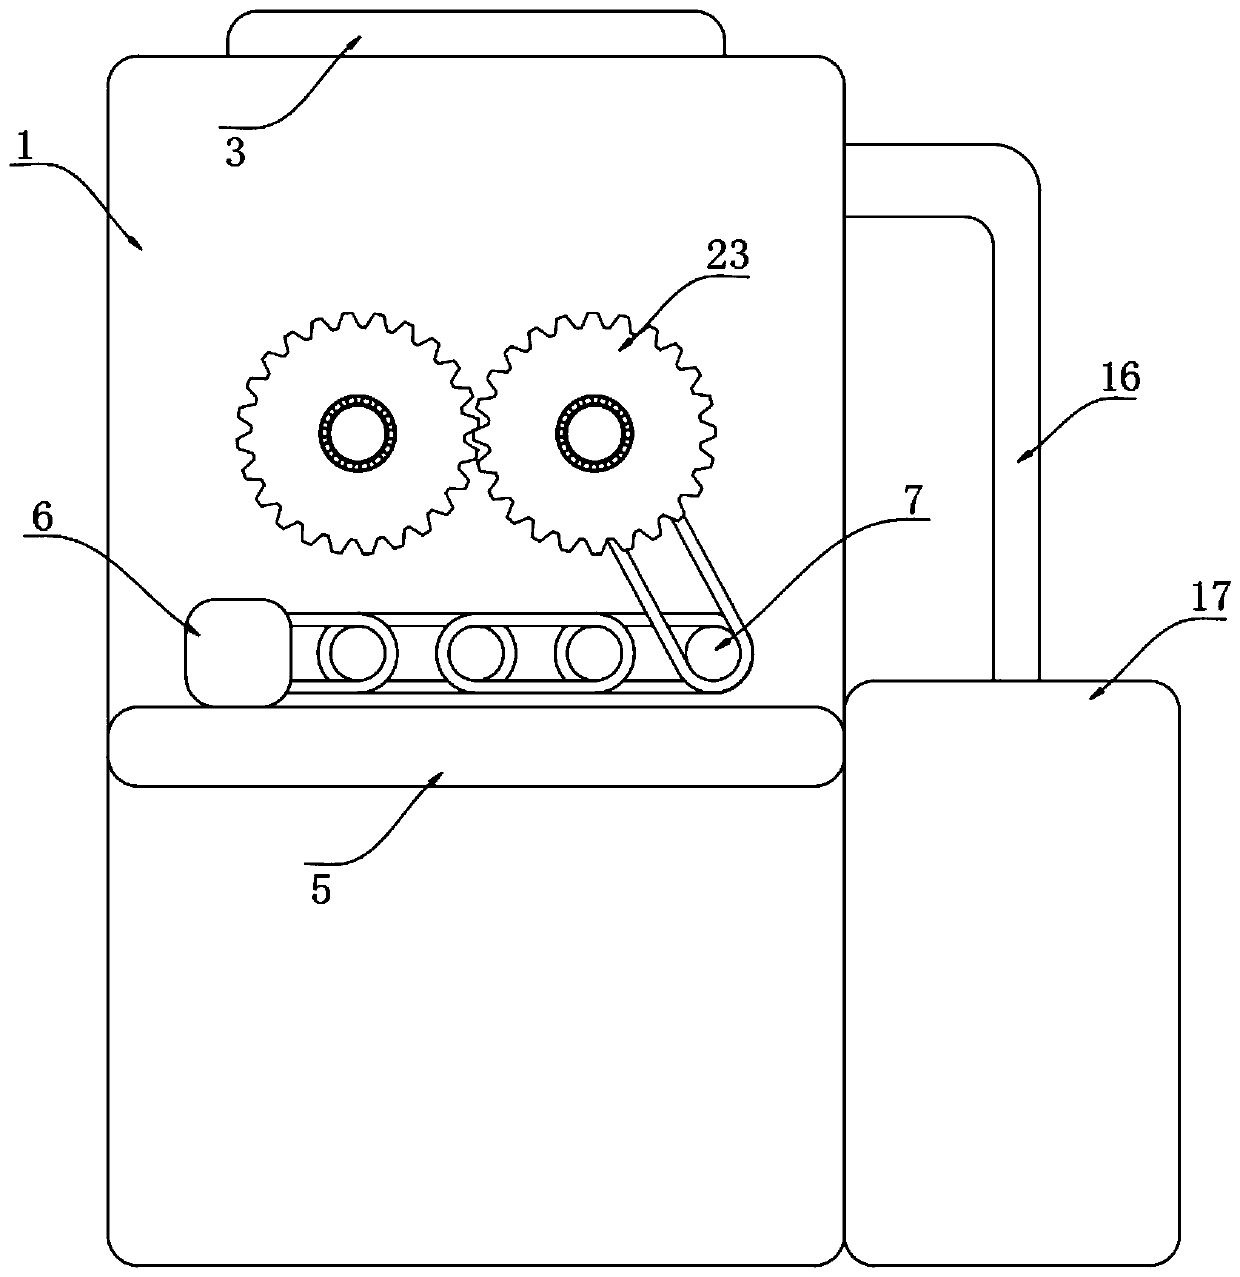 Screening device for soil remediation